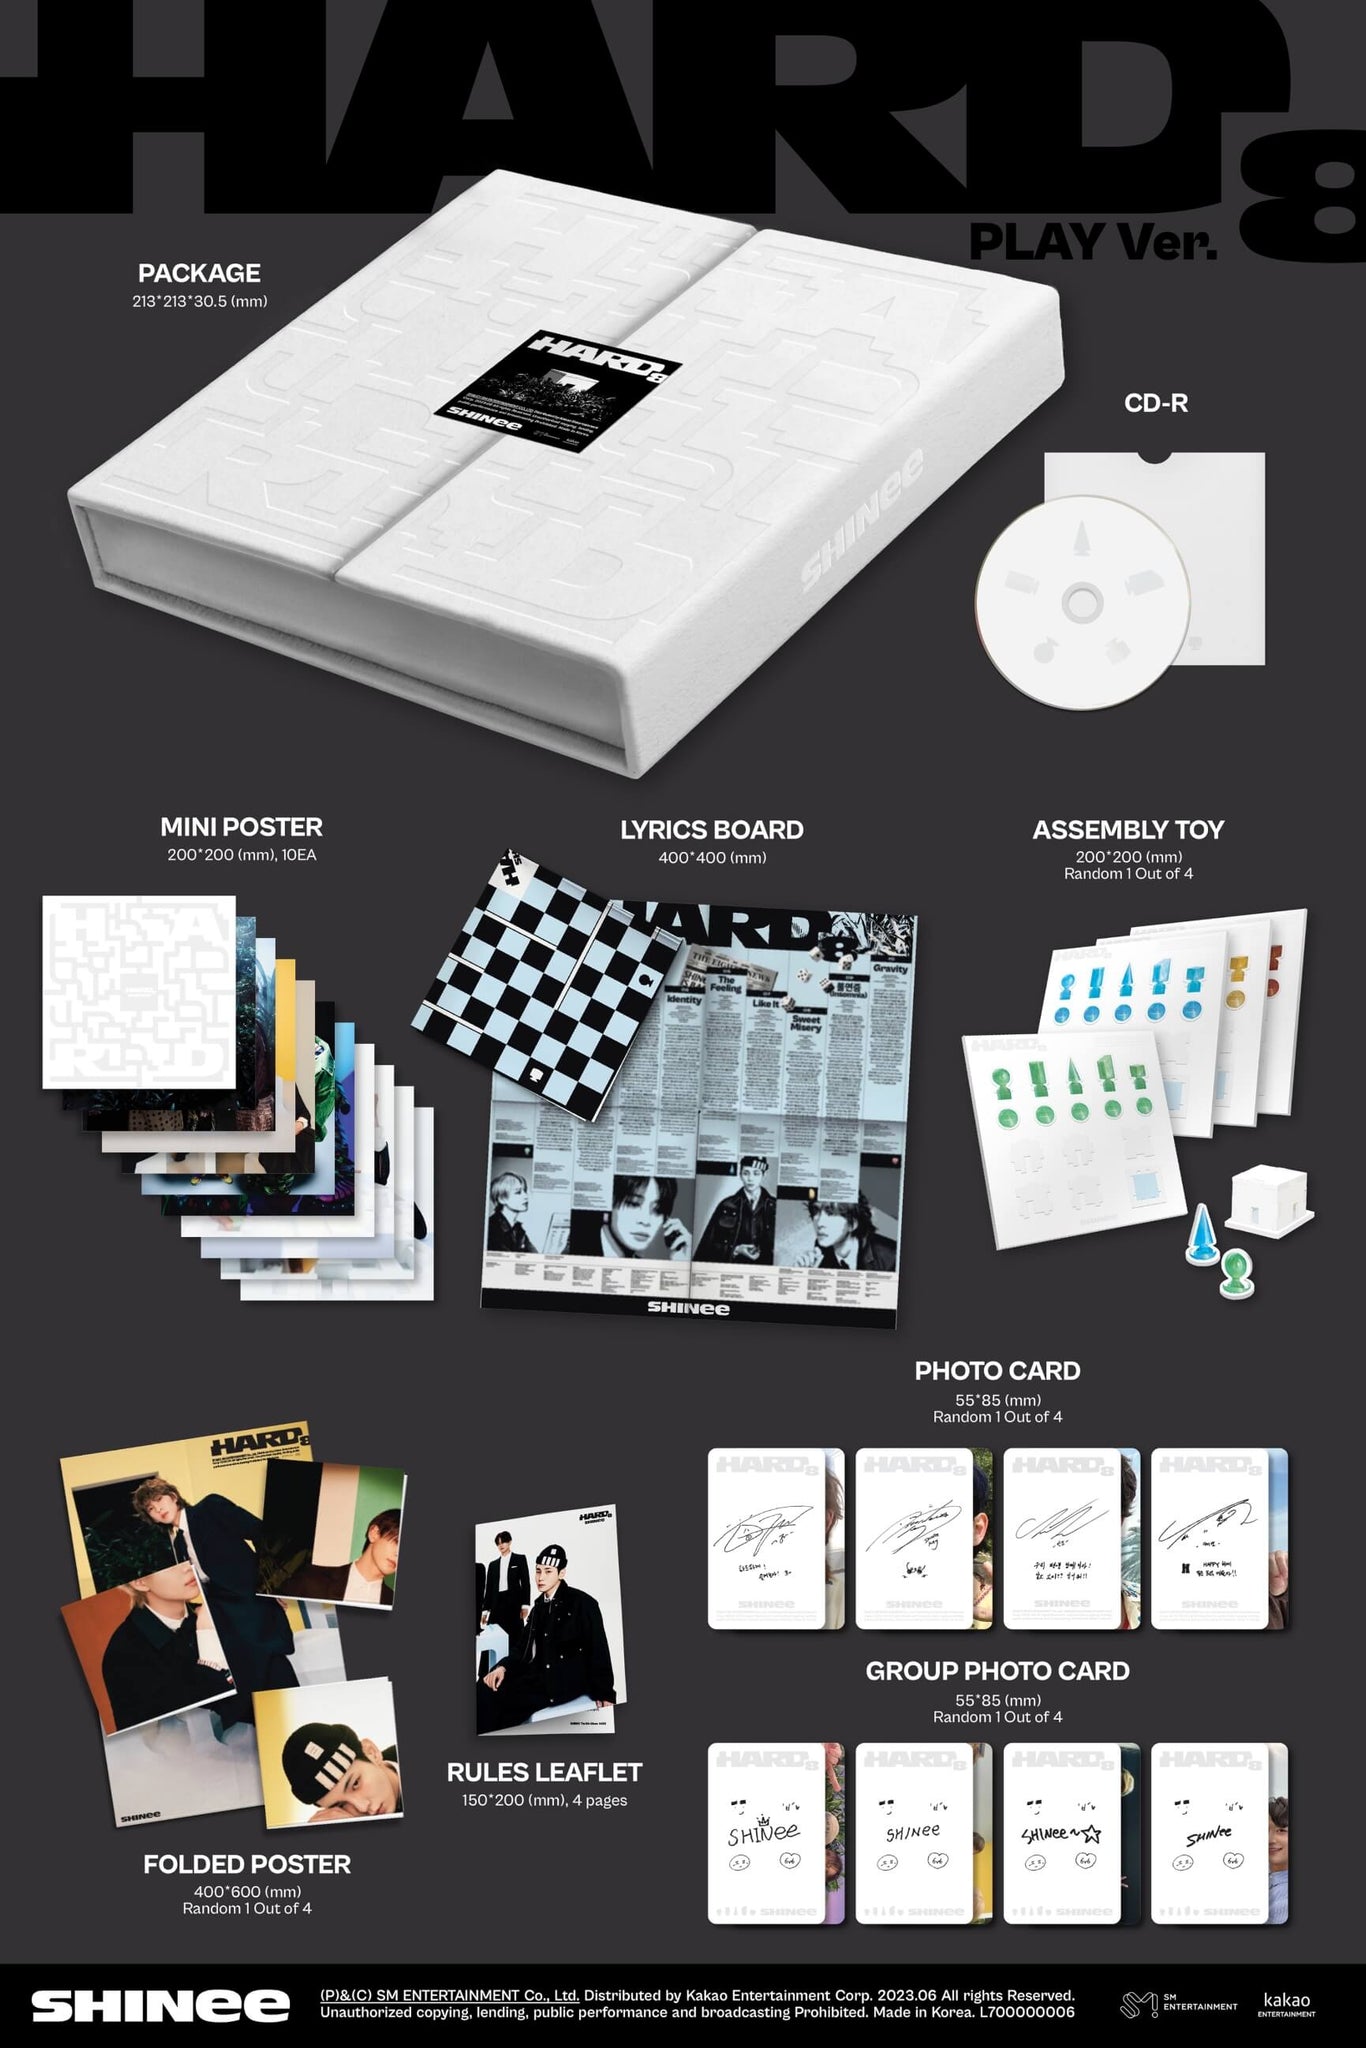 SHINee HARD (Package Ver.) - PLAY Version Inclusions Package CD Mini Poster Lyrics Poster Rules Leaflet Assemble Toy Photocard Group Photocard Folded Poster 